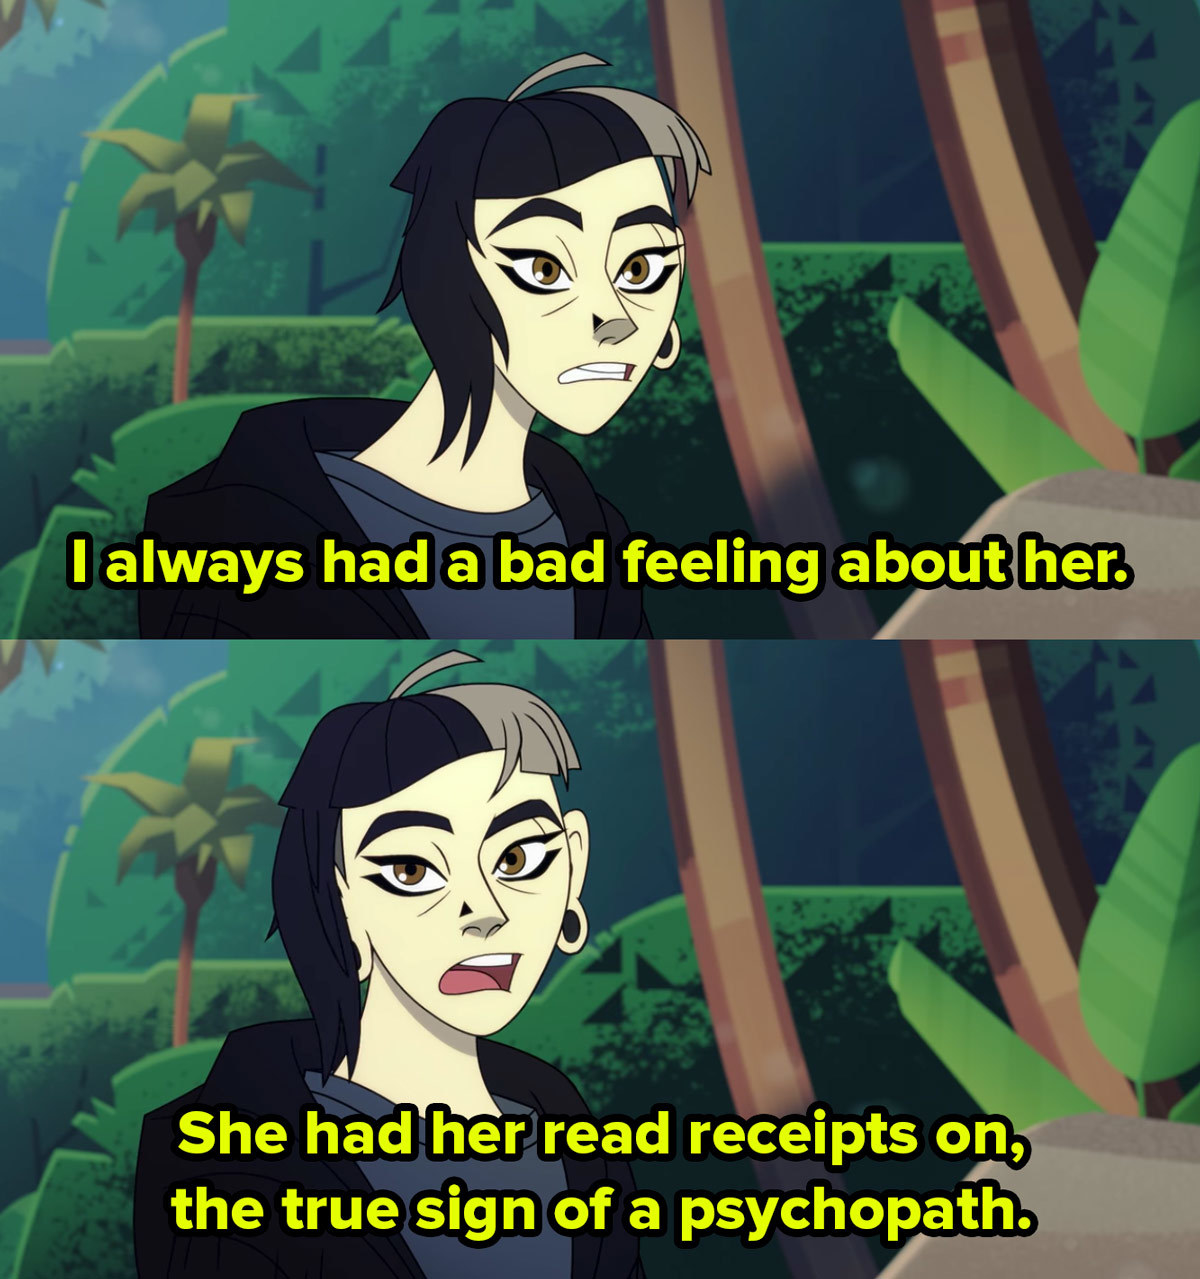 A cartoon woman stands on a beach in front of foliage and says I always had a bad feeling about her, she had her read receipts on, the true sign of a psychopath